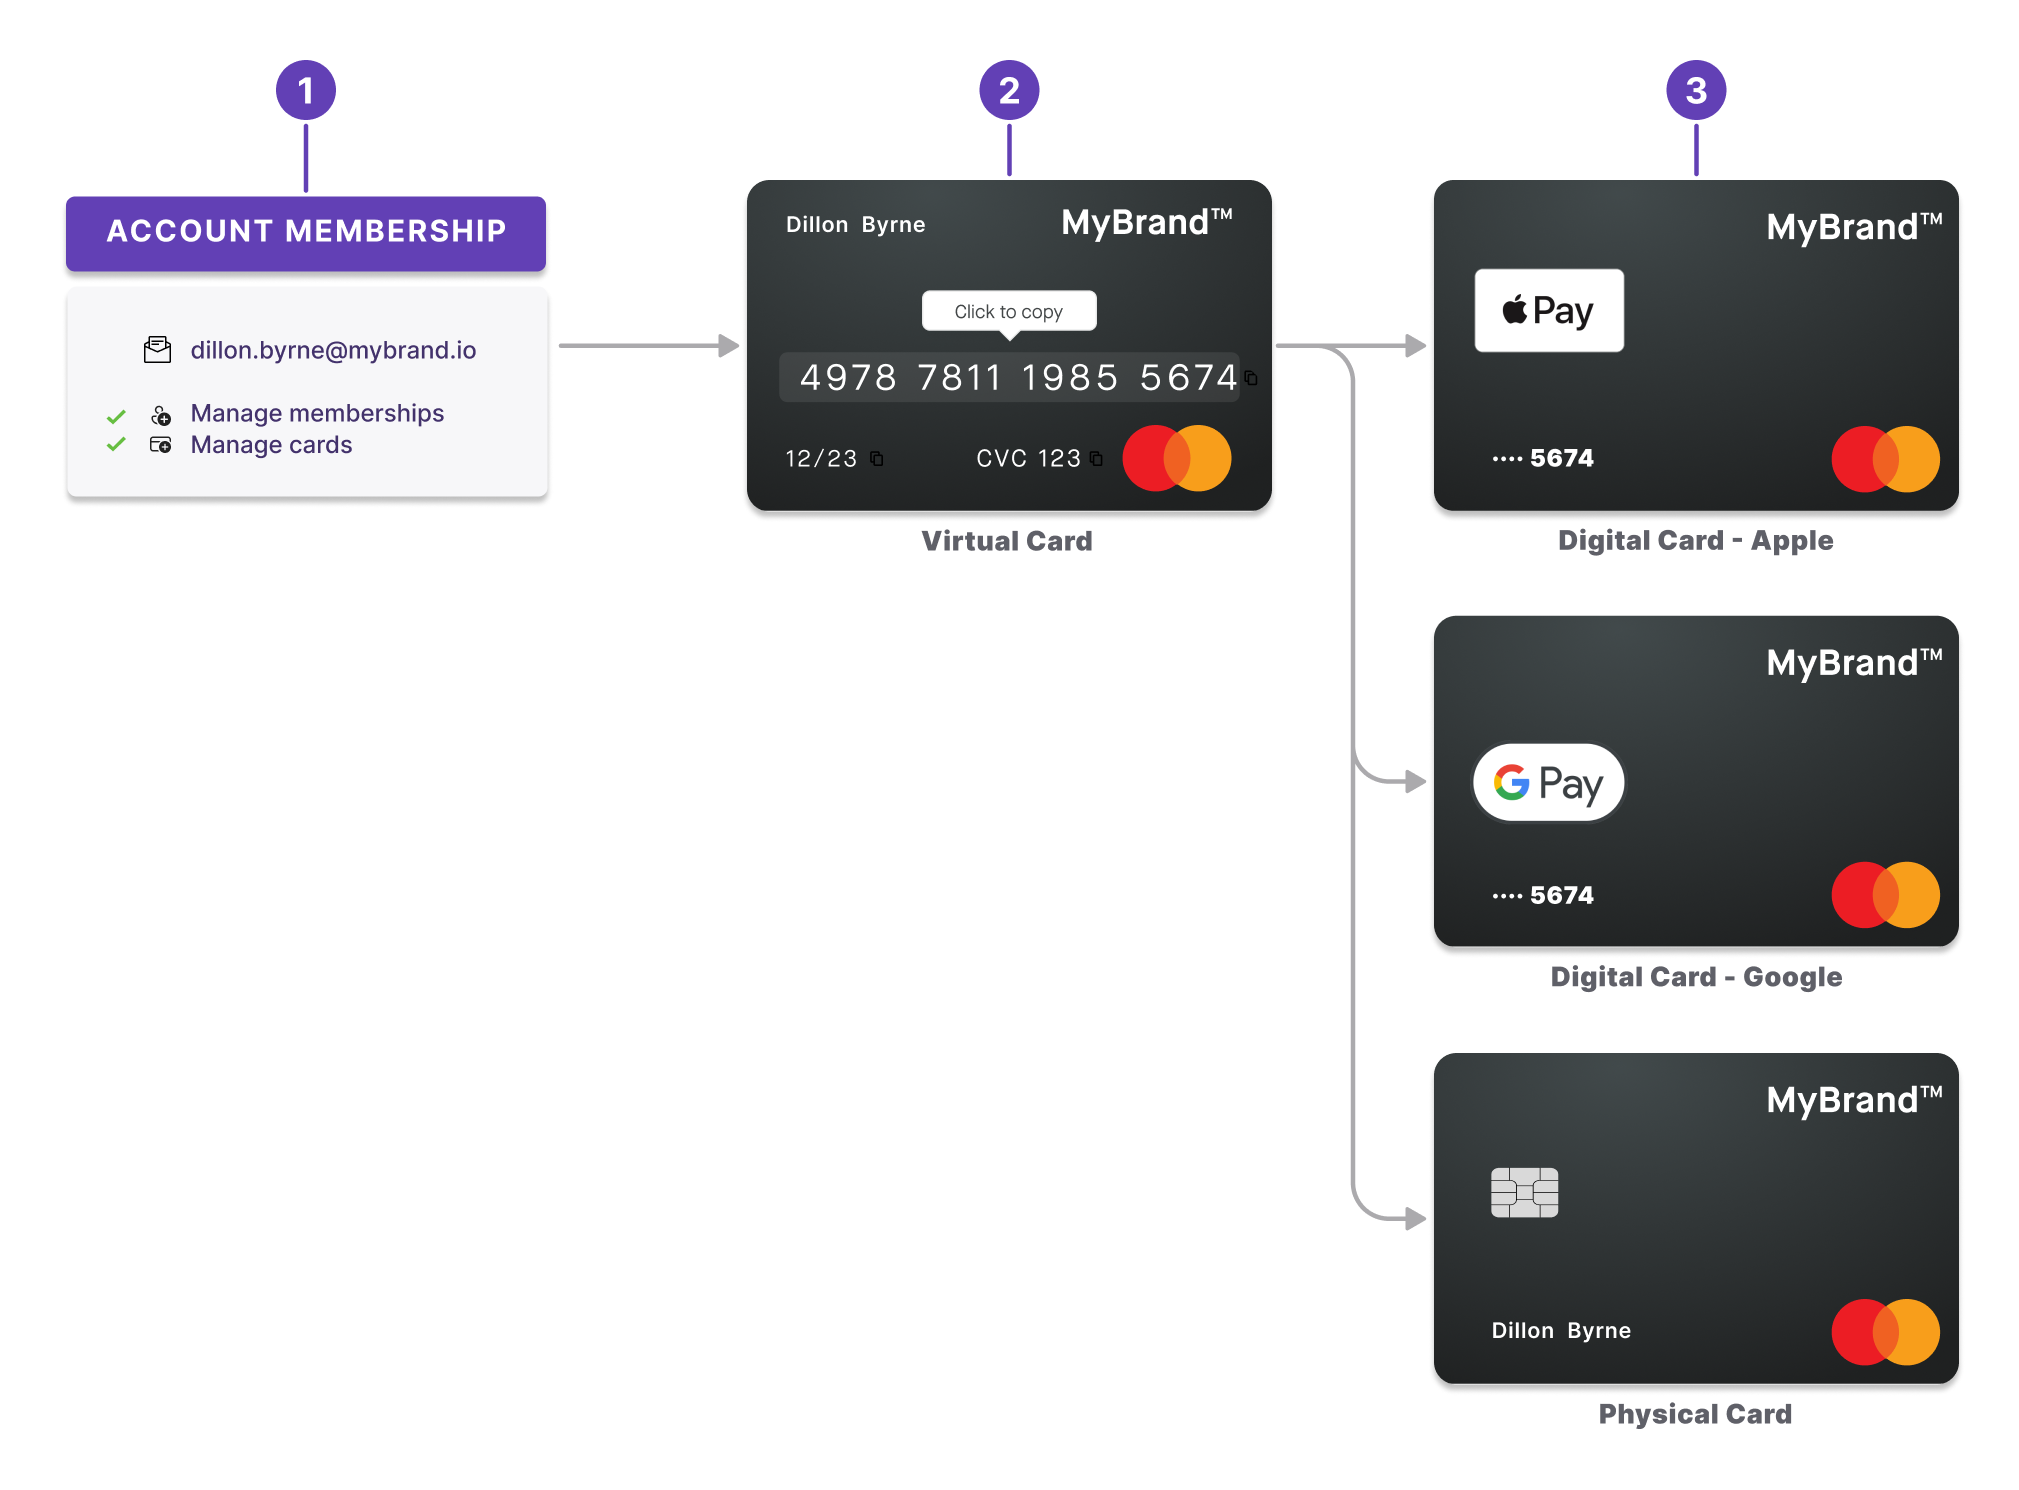 Image displaying connection between account membership, virtual card, then digital and physical cards